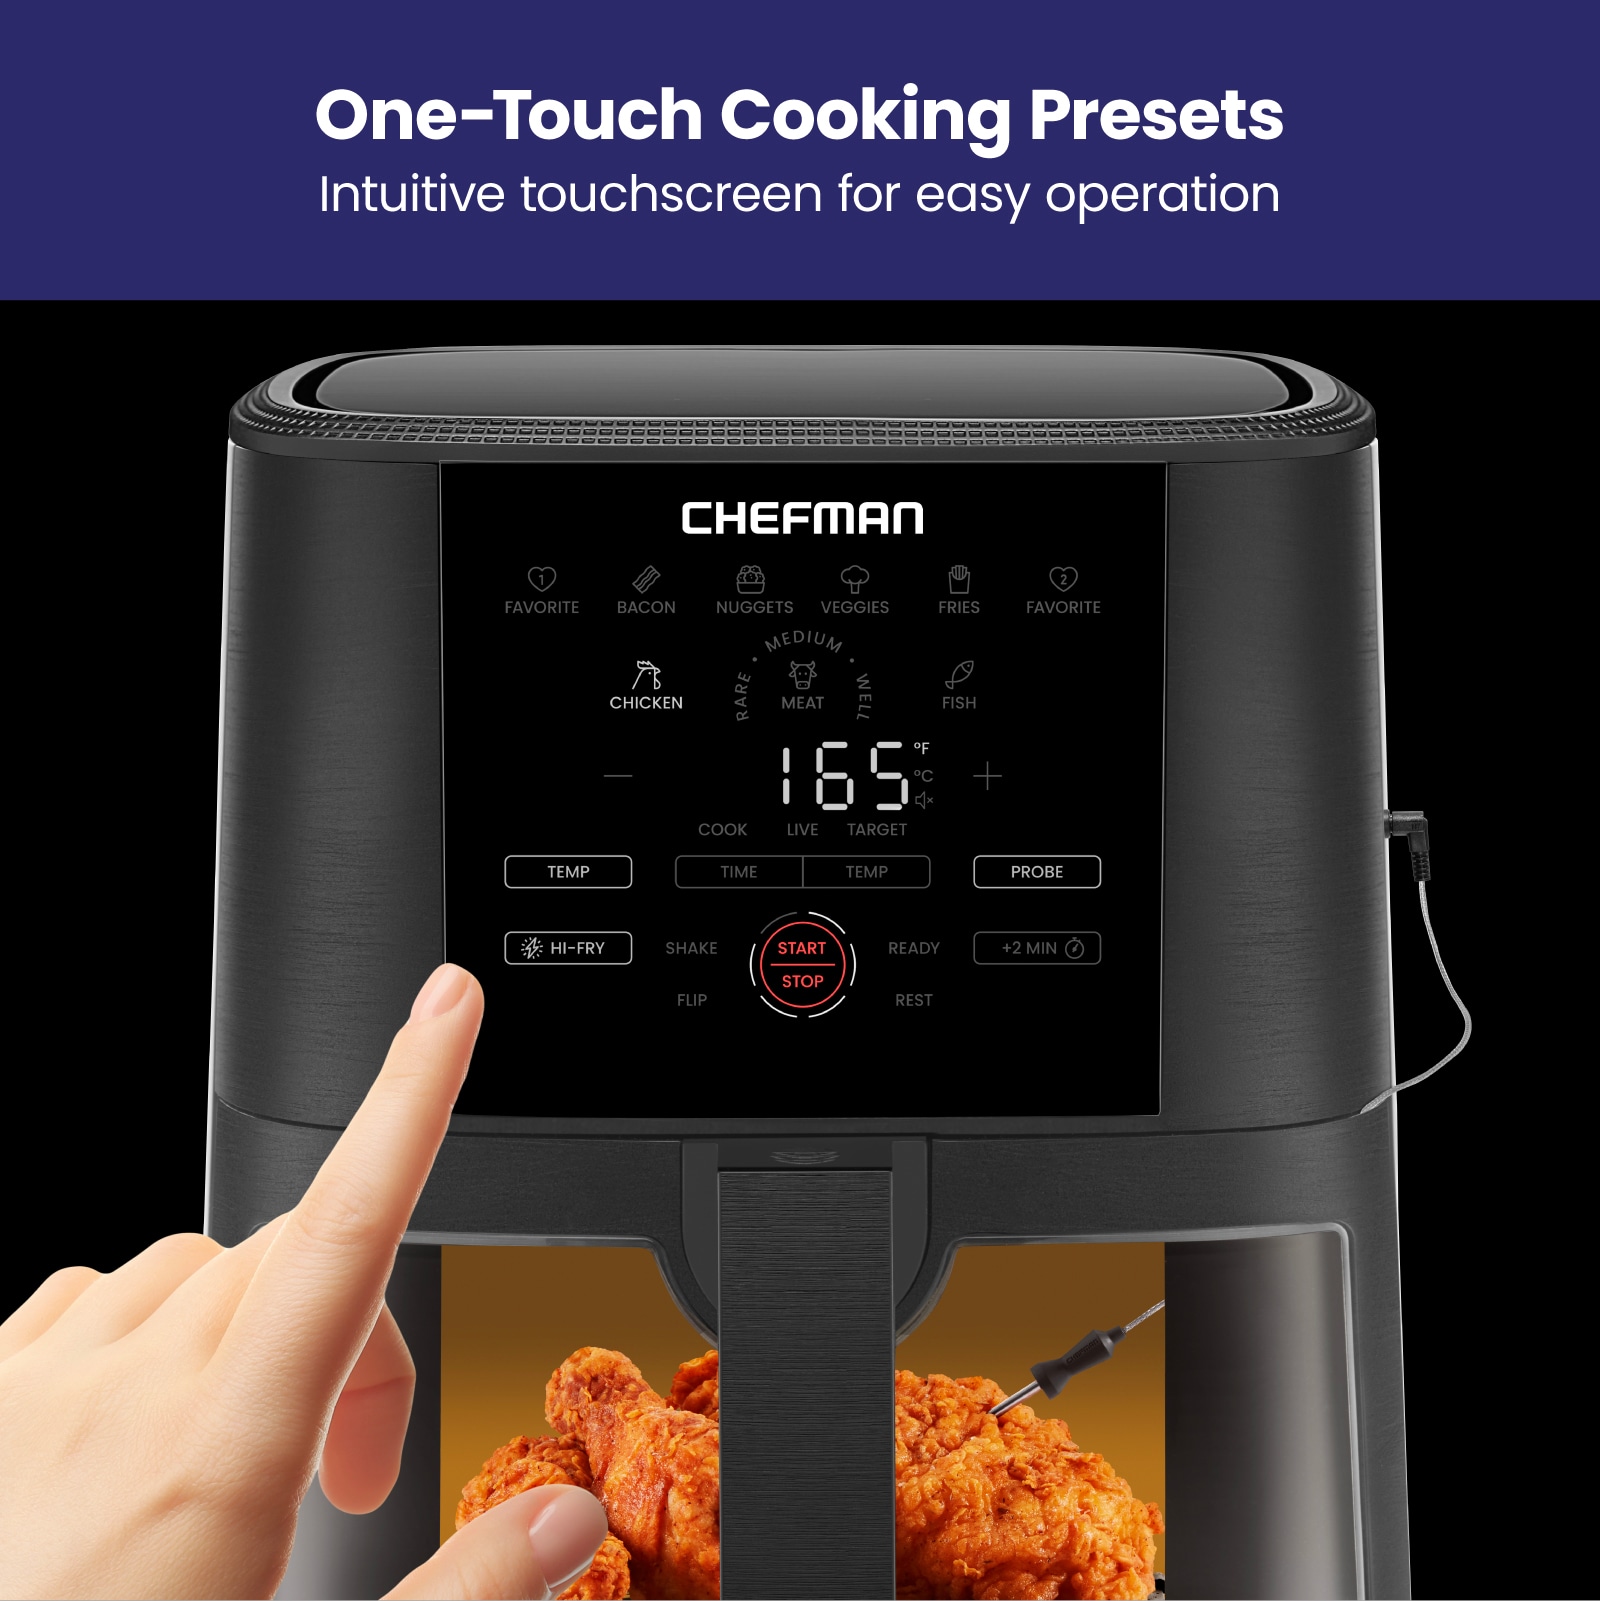 Chefman's regularly $90 stainless steel TurboFry 5-qt. air fryer is down at  $40 for today only